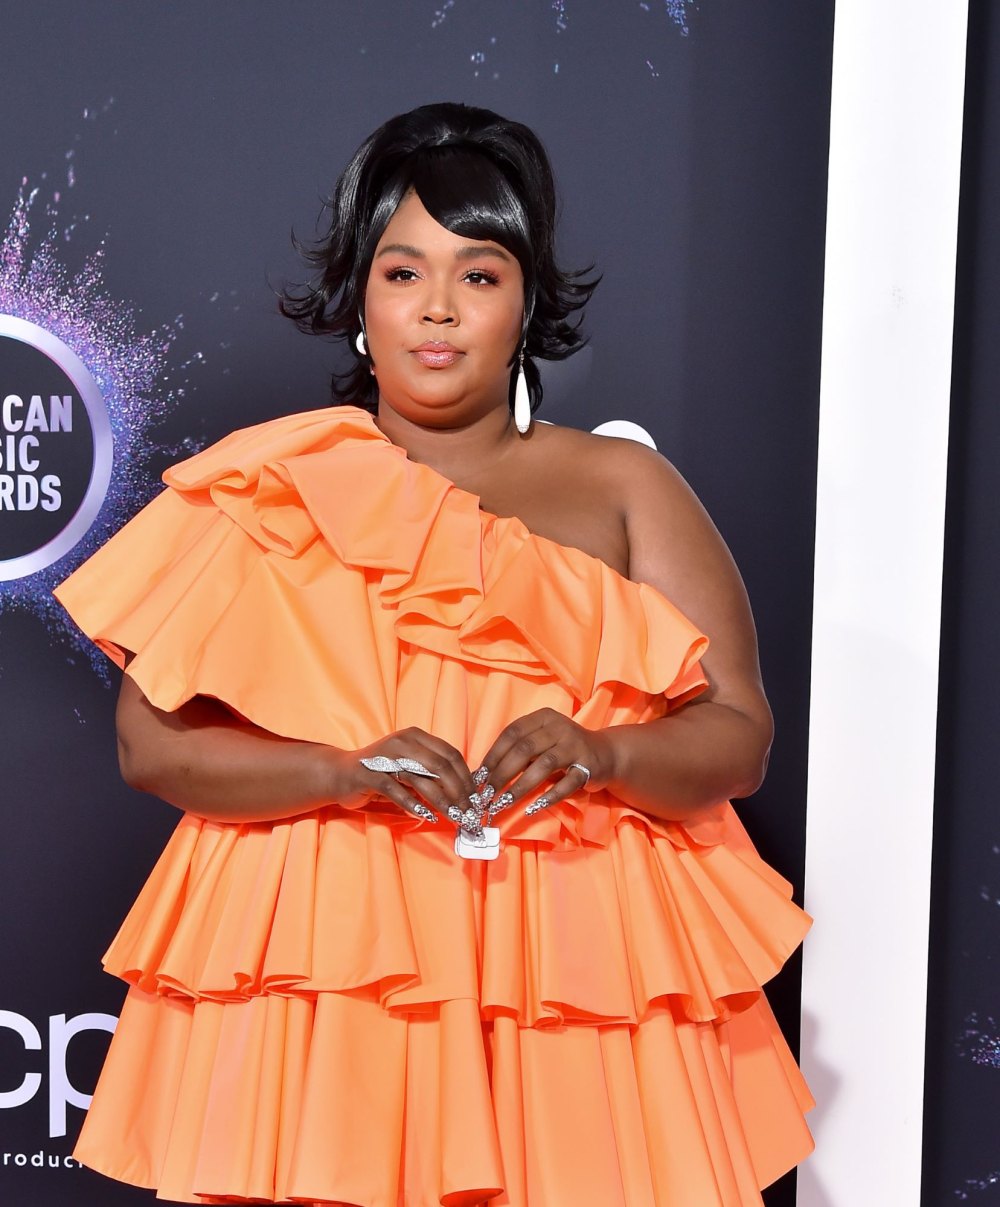 lizzo worries fans with new post amid 'I quit' drama